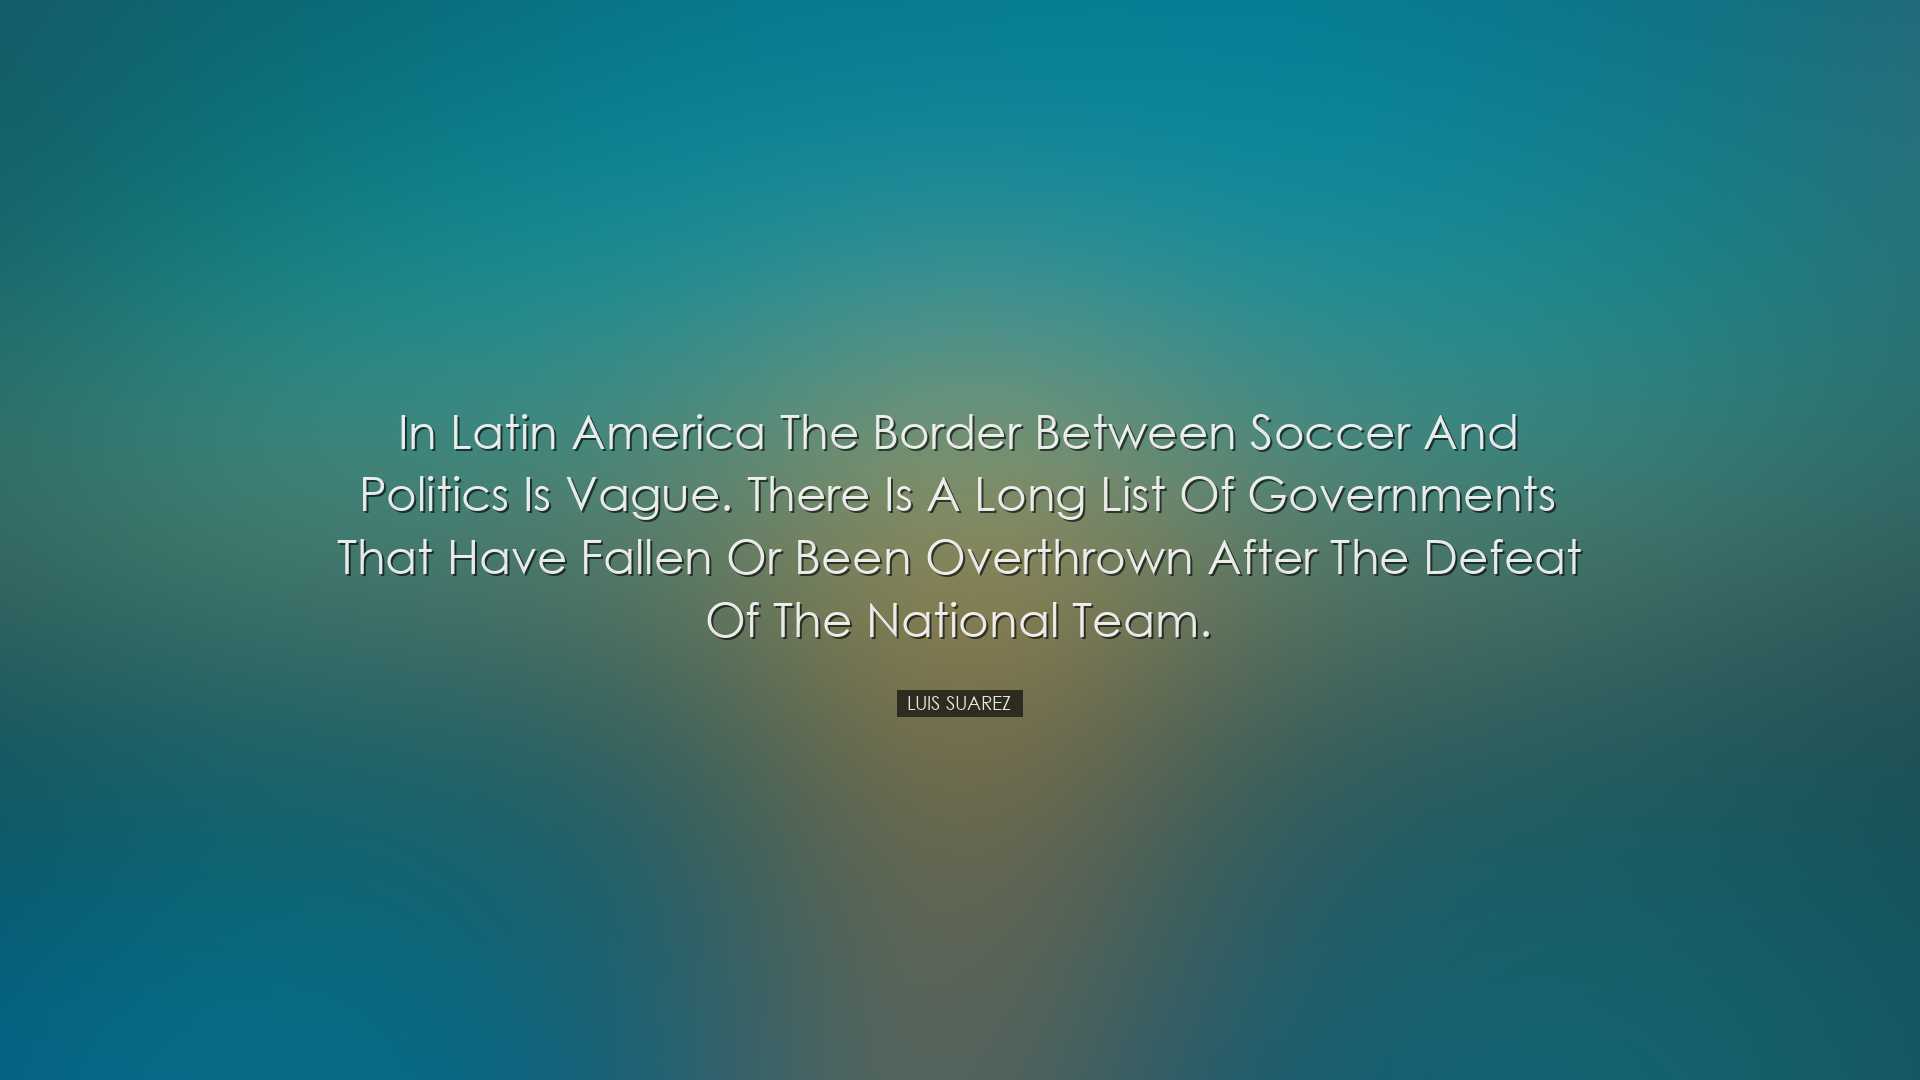 In Latin America the border between soccer and politics is vague.